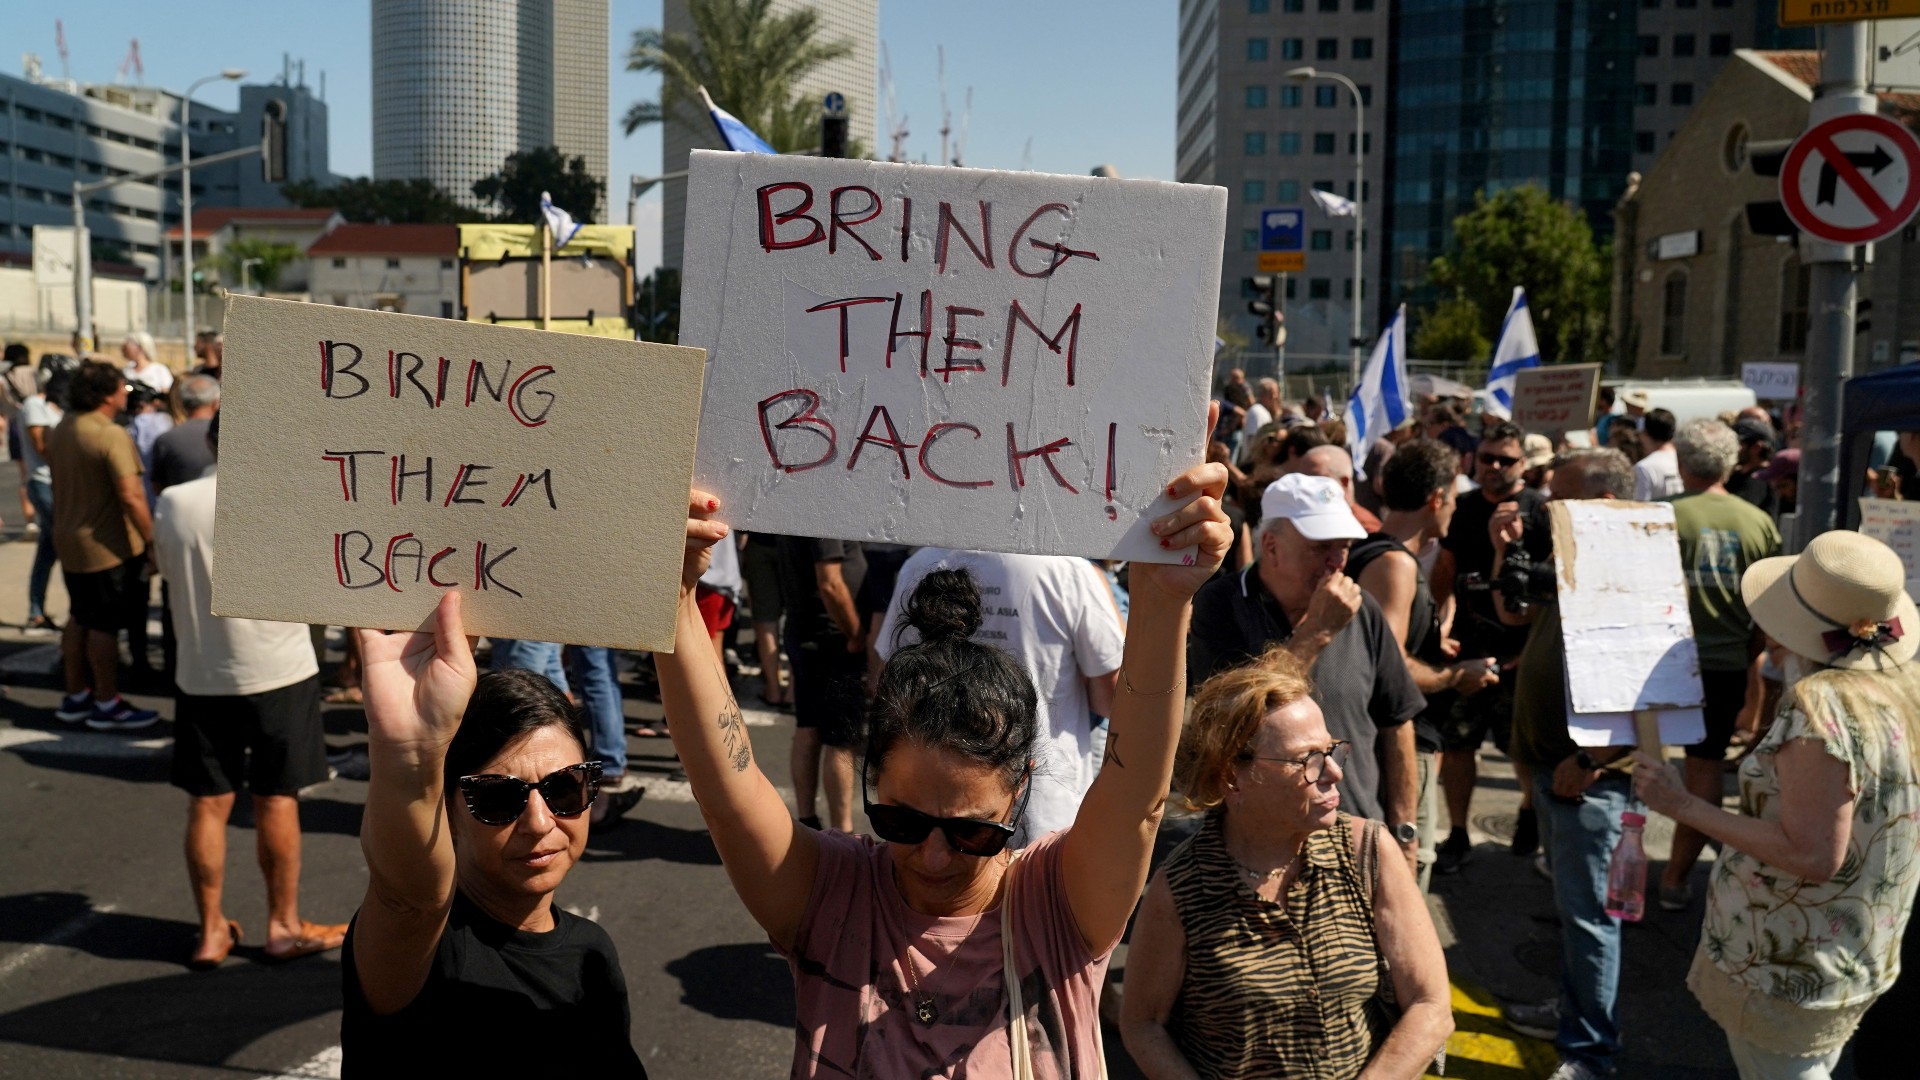 Israelis attend a demonstration, calling for the return of loved ones who were taken as captives, in Tel Aviv on 14 October (Reuters)